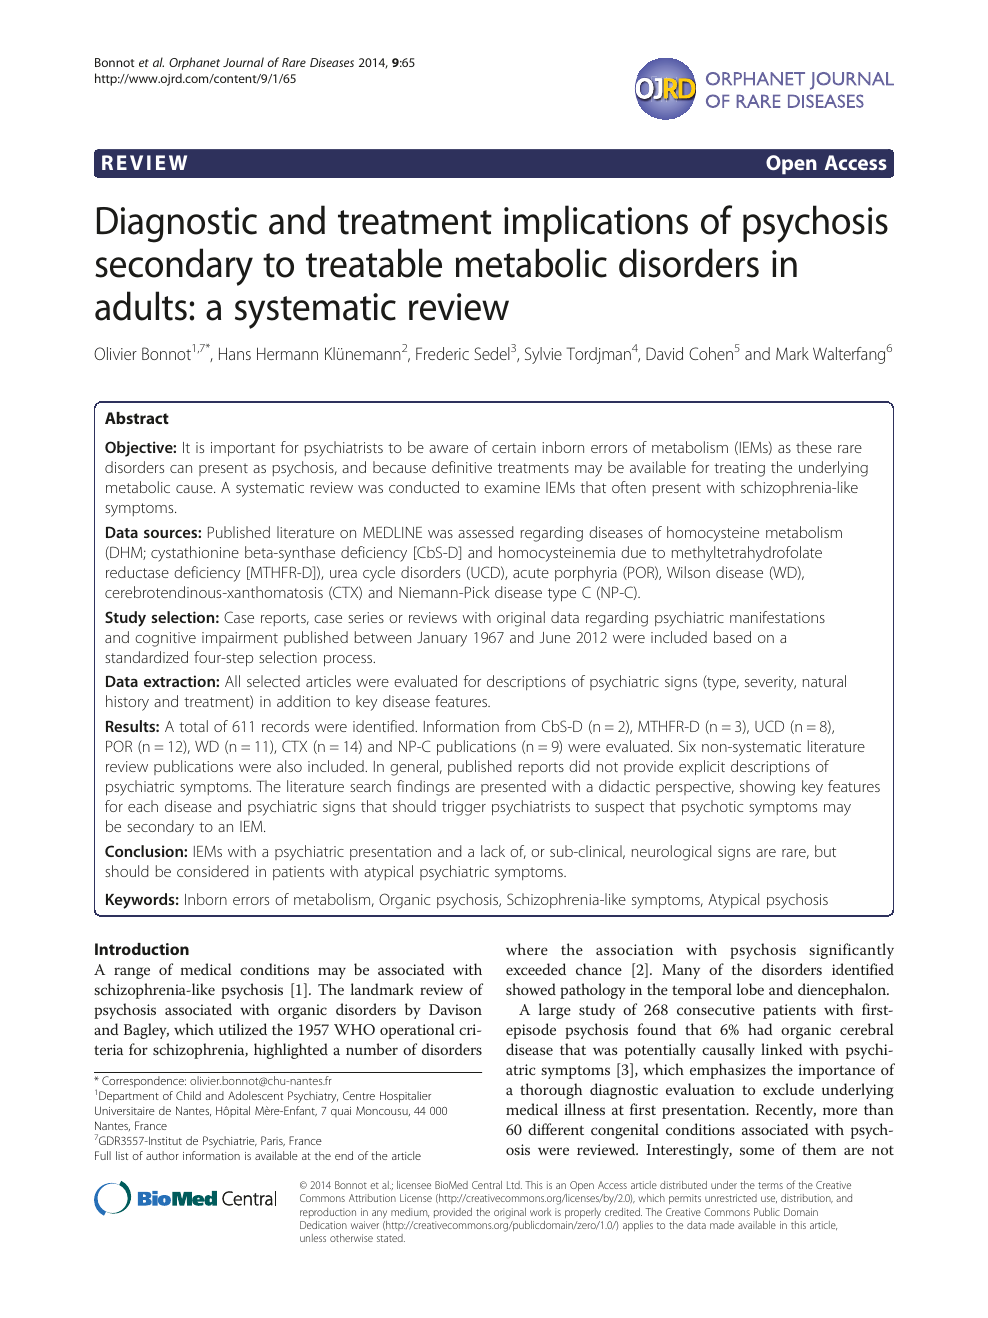 Psychiatric and Cognitive Symptoms Associated with Niemann-Pick Type C  Disease: Neurobiology and Management